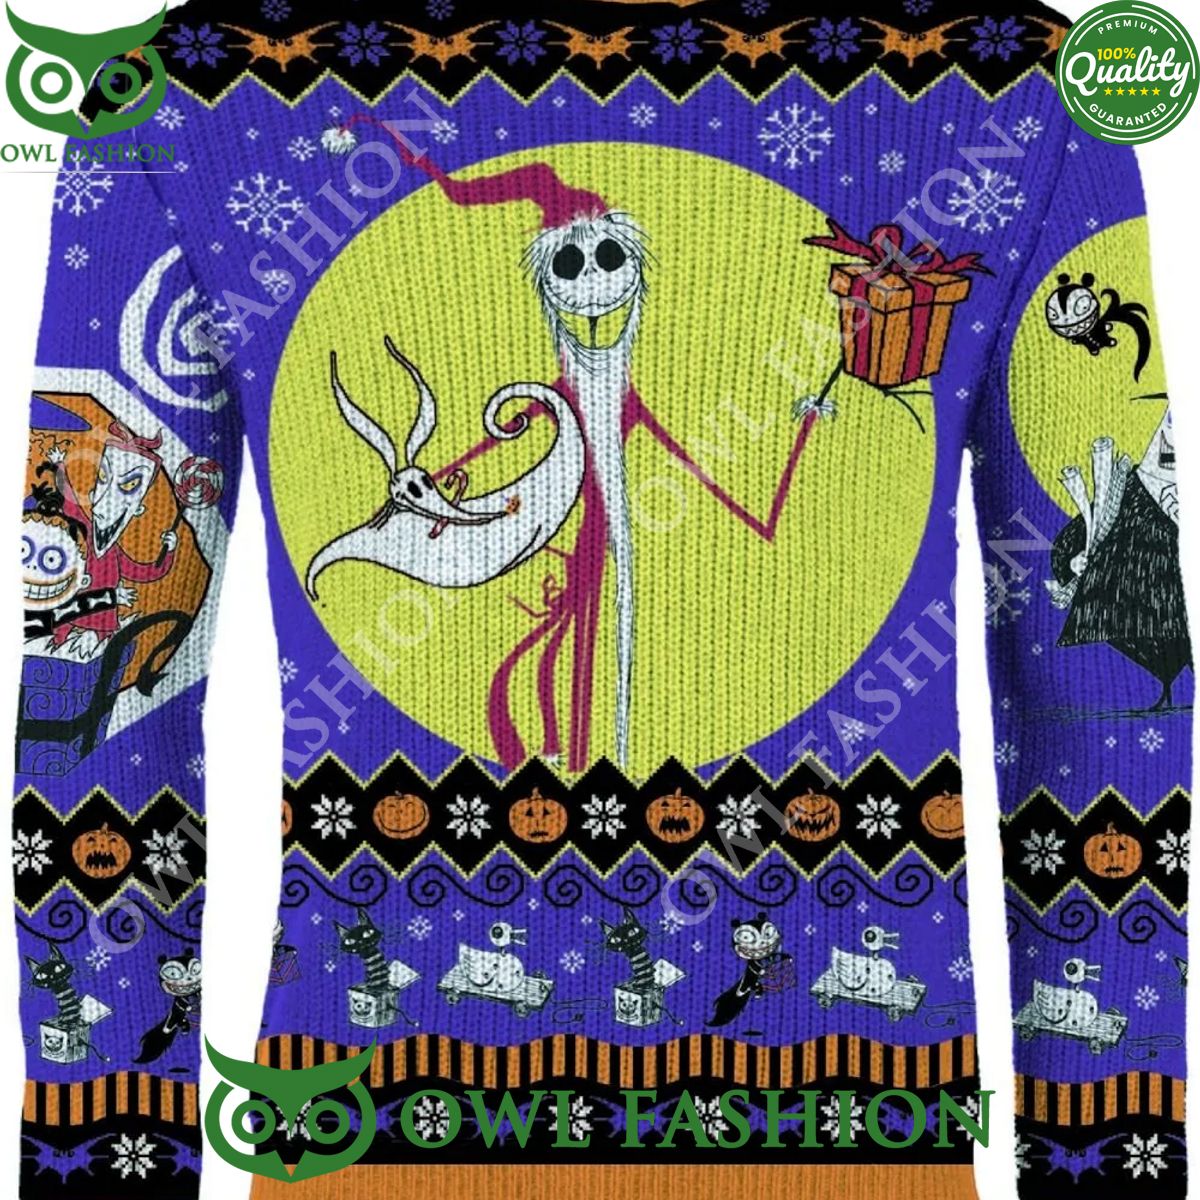 Nightmare Before Christmas Christmas Jumper Great, I liked it